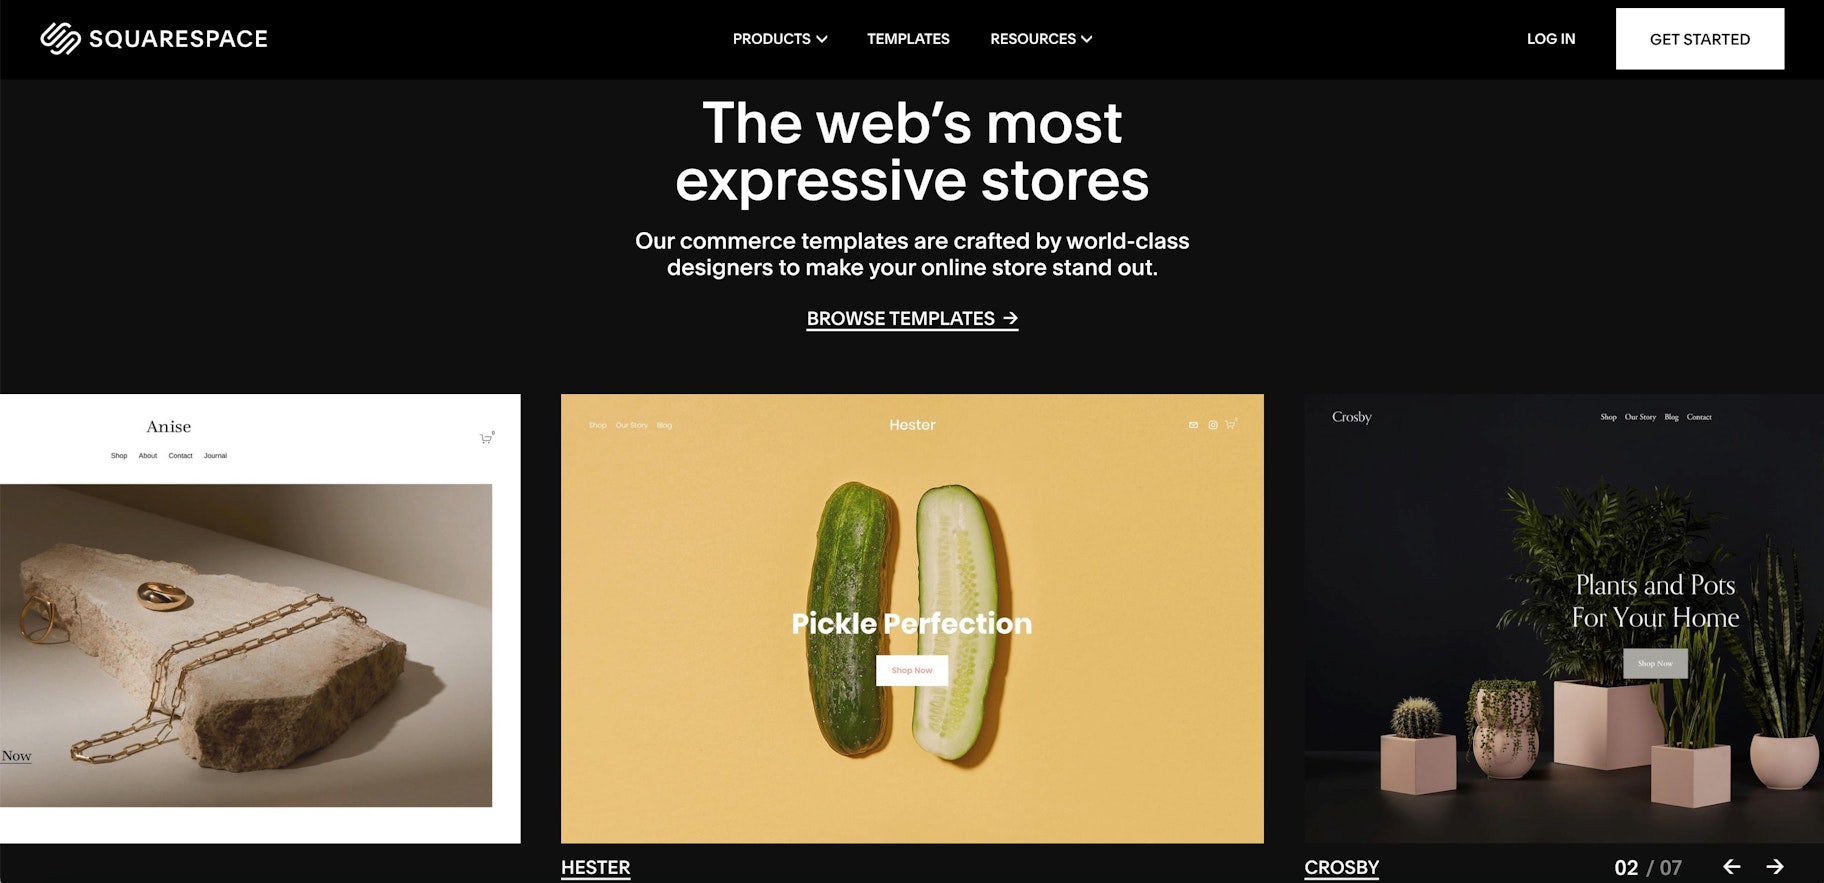 shopify alternatives for online store: Squarespace